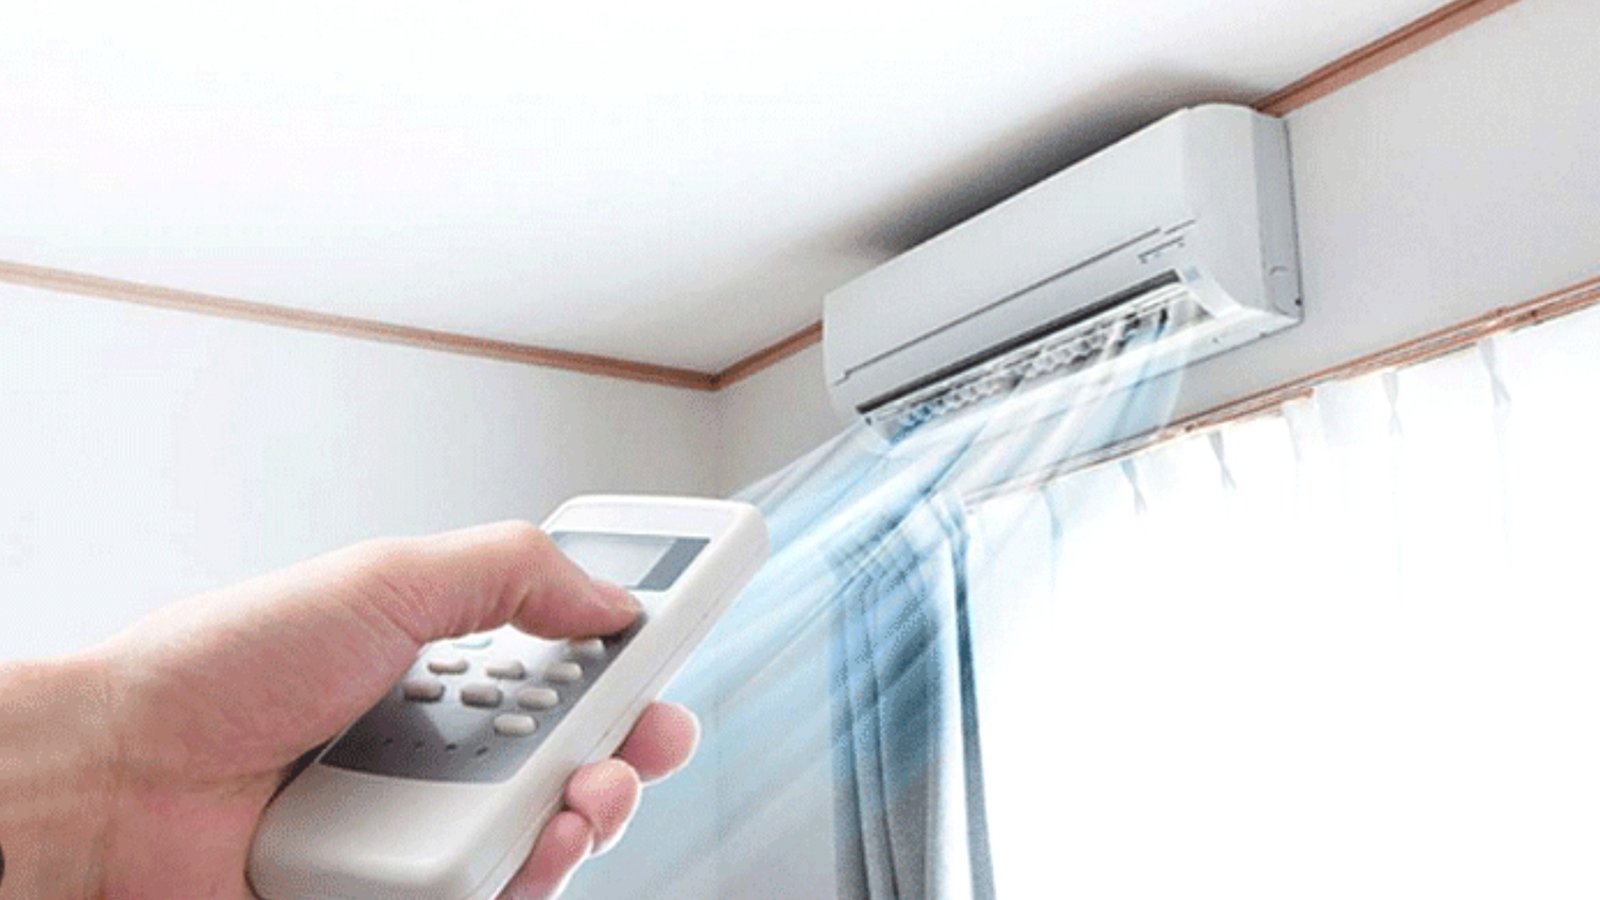 The house will be cold, keep 3 tips in mind before running the AC